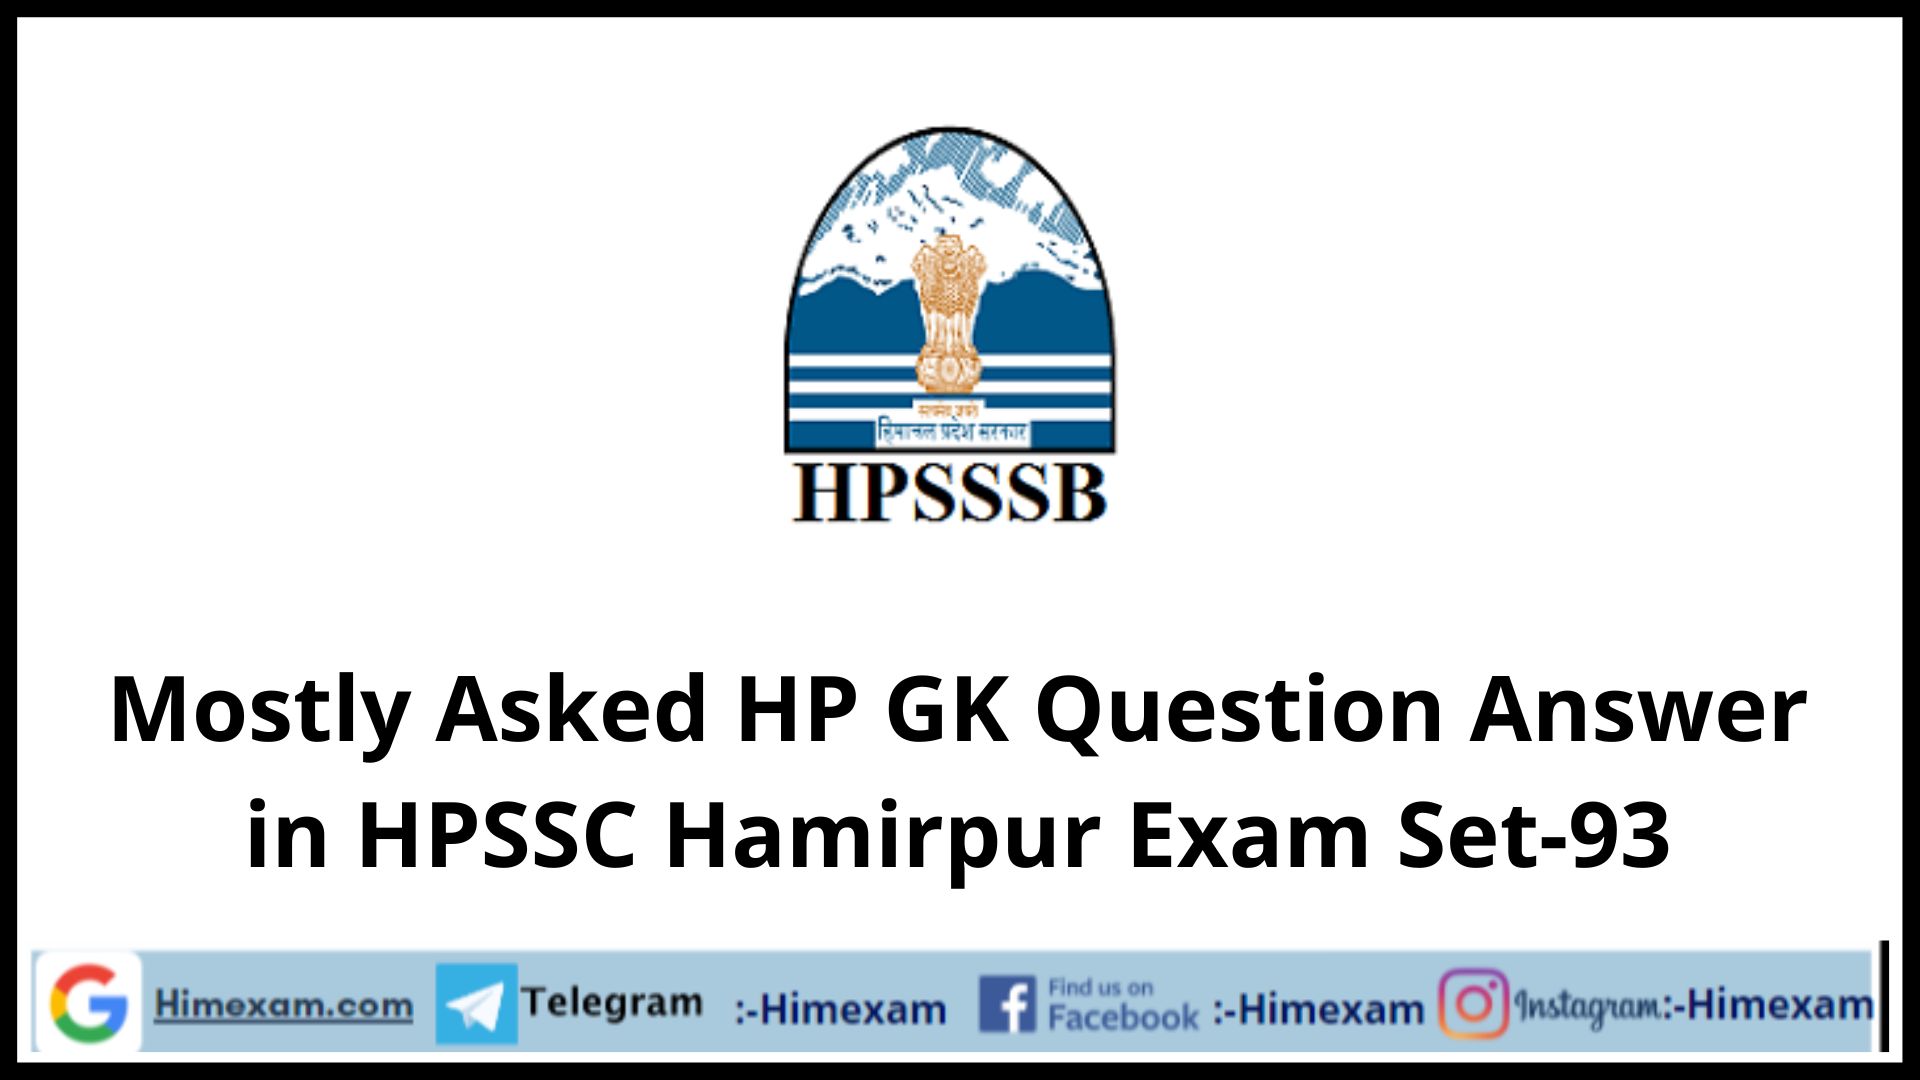 Mostly Asked HP GK Question Answer in HPSSC Hamirpur Exam Set-93